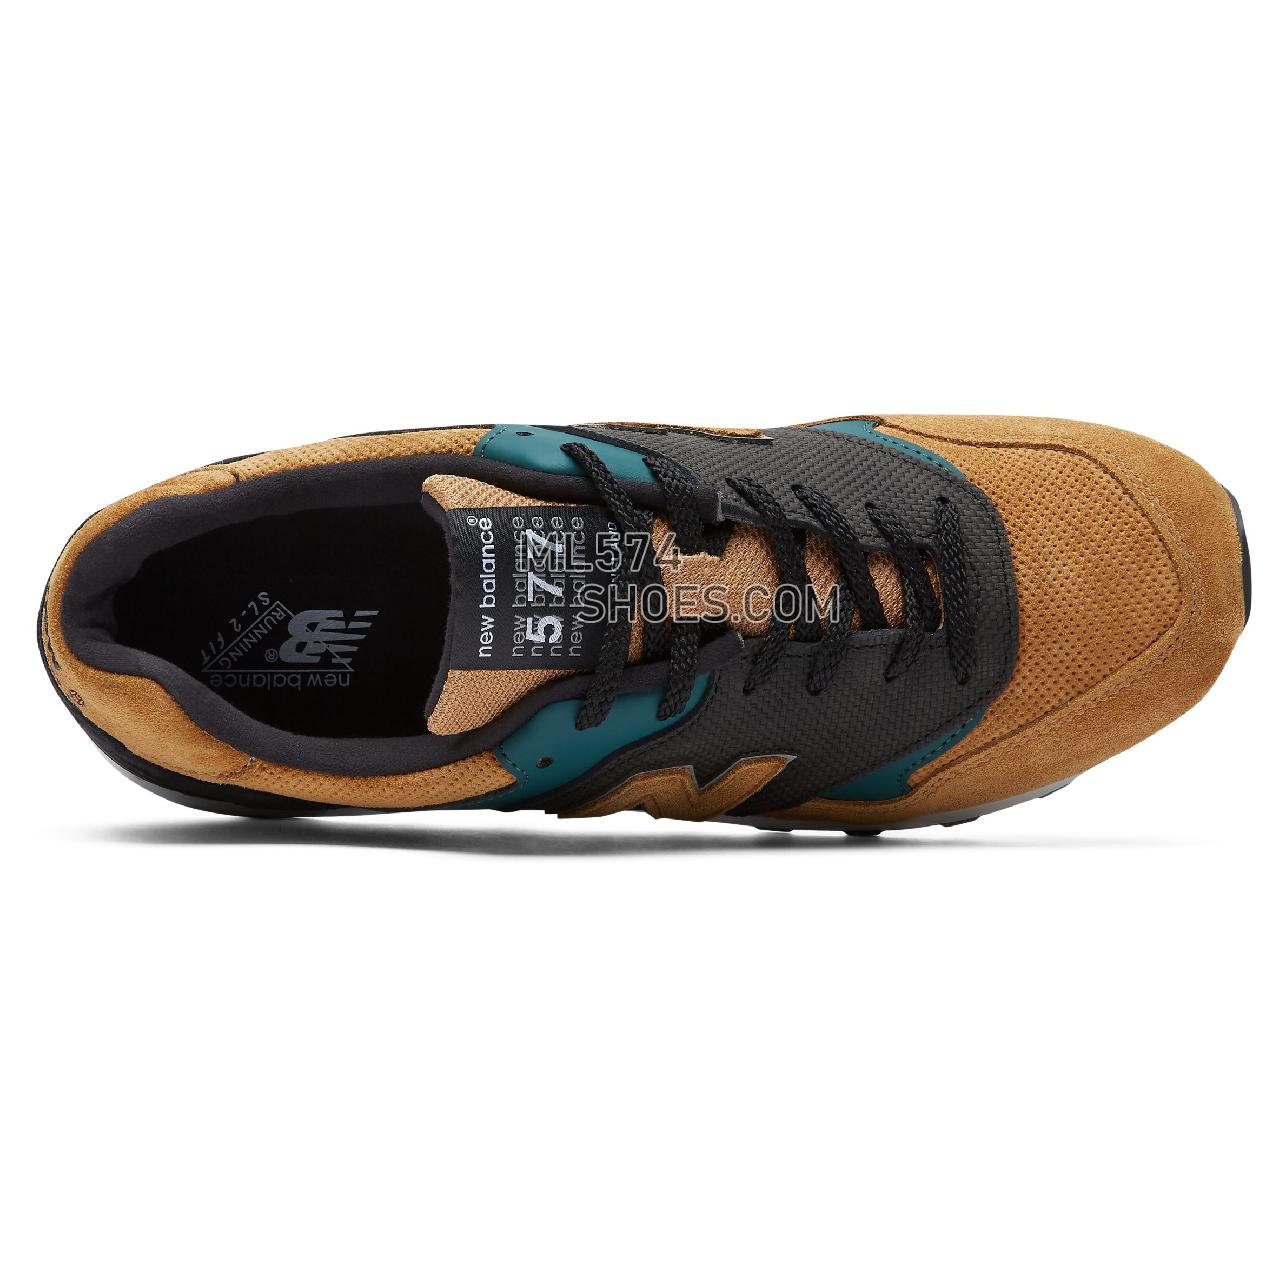 New Balance Made in UK 577 - Men's Made in UK 577 Classic ML577V1-27415-M - Tan with Green and Black - M577TGK